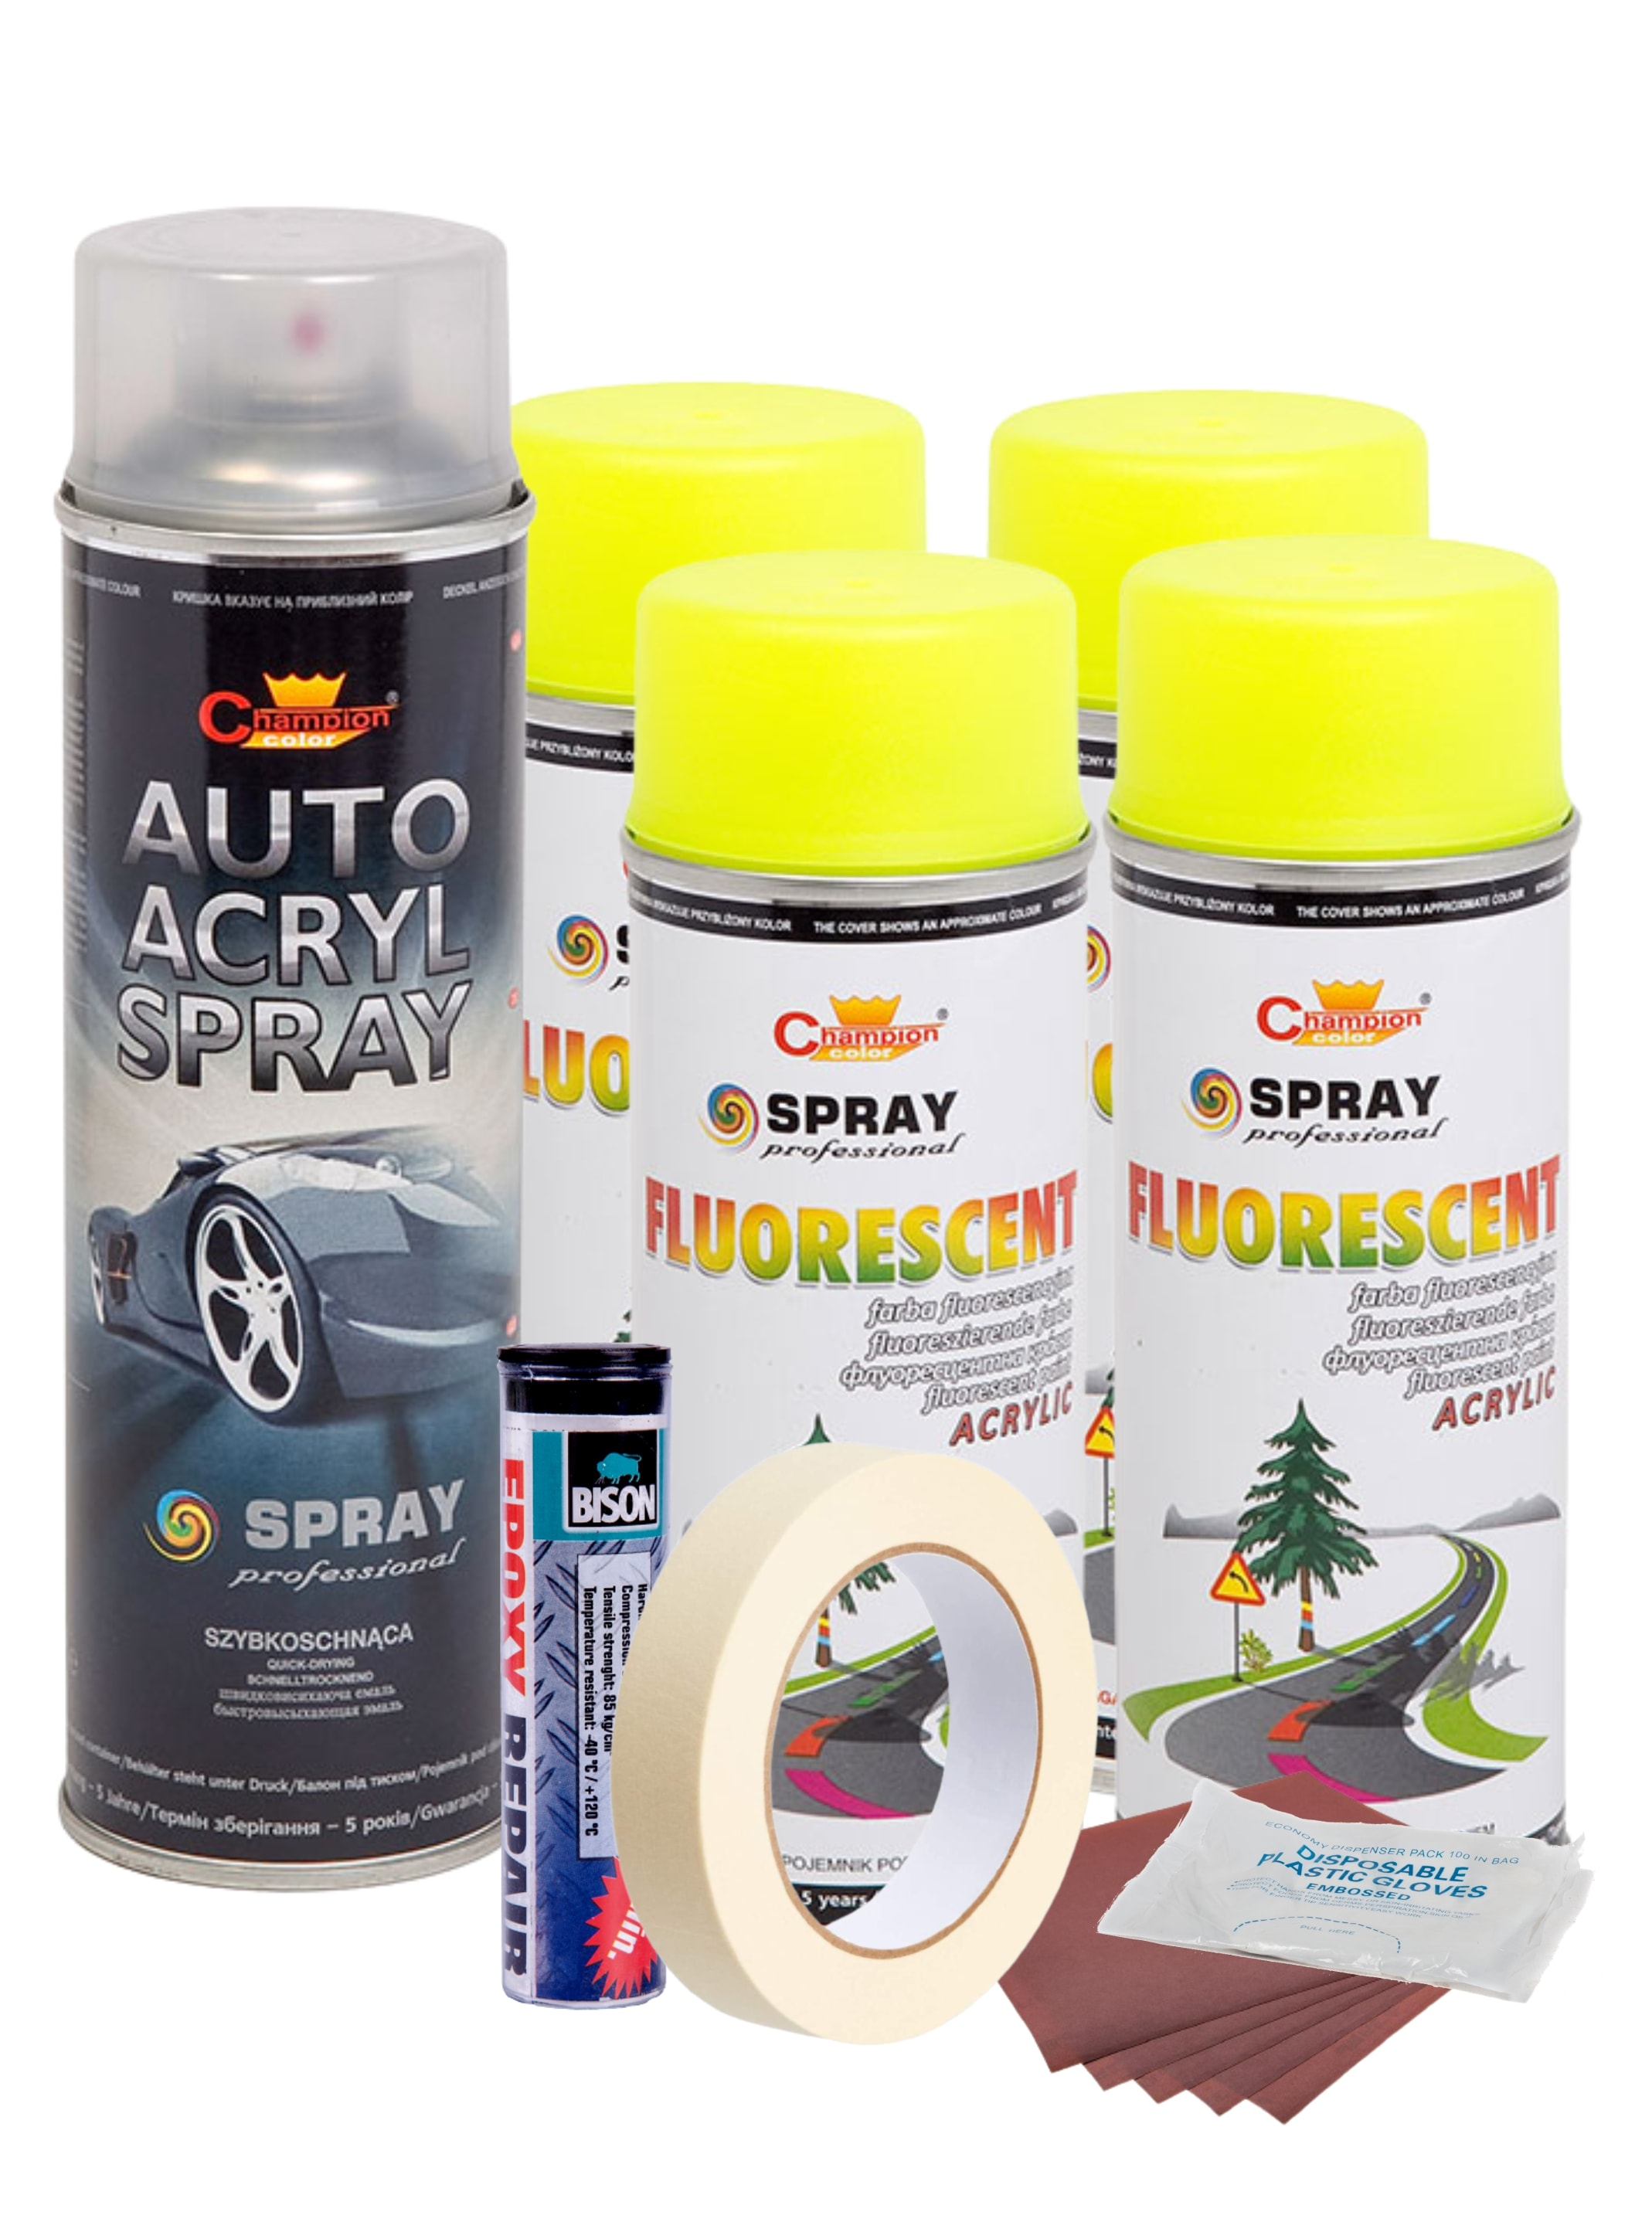 Complete kit for repairing and painting wheels in Fluorescent Yellow color, V4